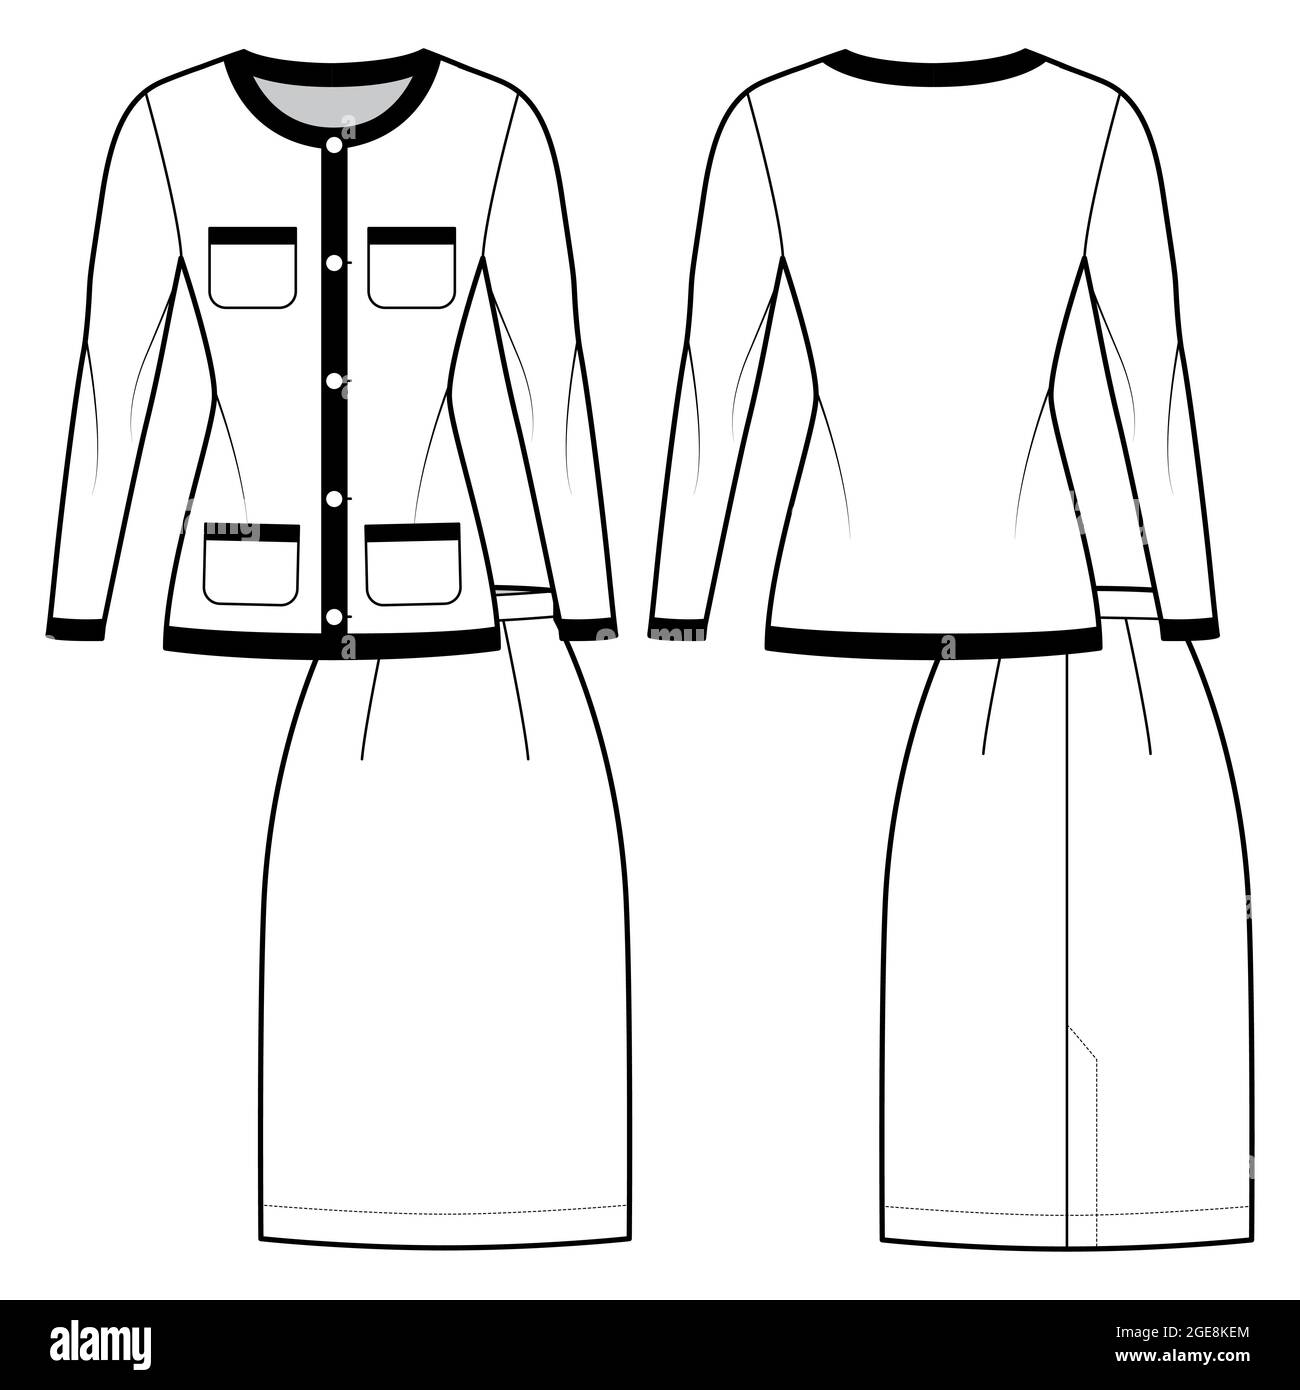 Set of Suit Chanel - style - classic skirt and blazer technical